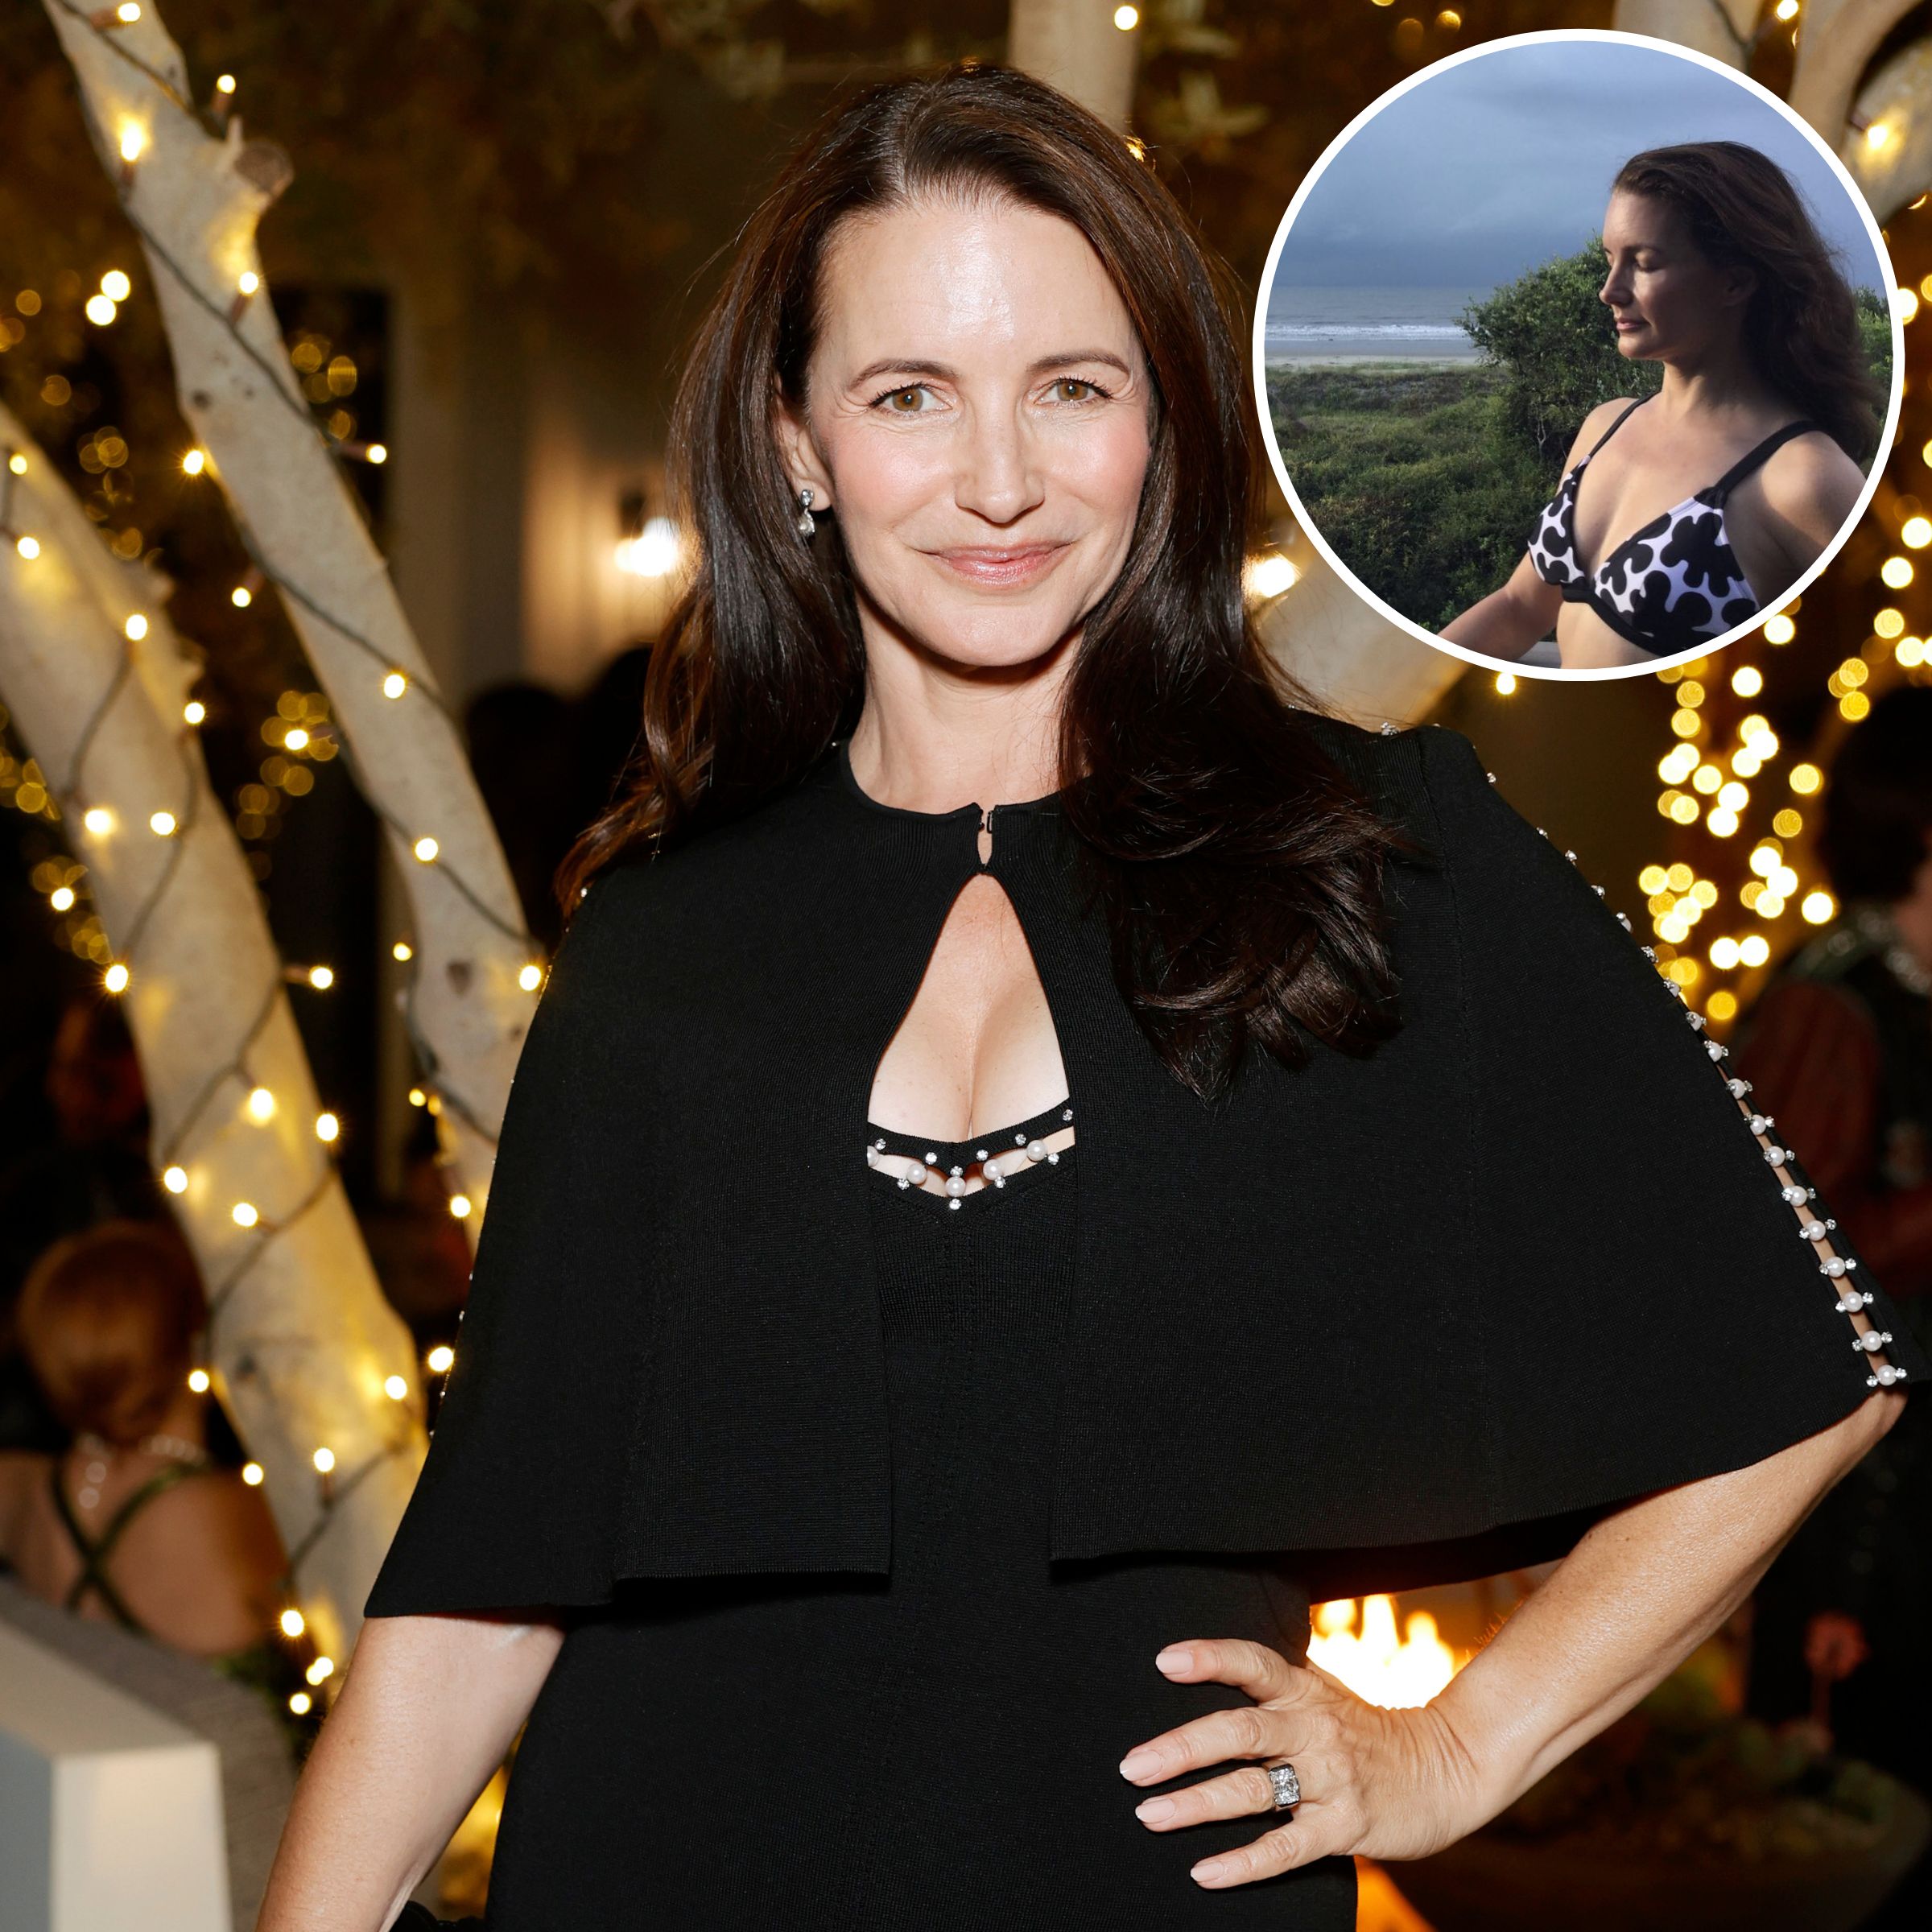 Kristin Davis Loves Showing Off Her Swimsuit Style! See the ‘Sex and the City’ Star’s Bikini Photos